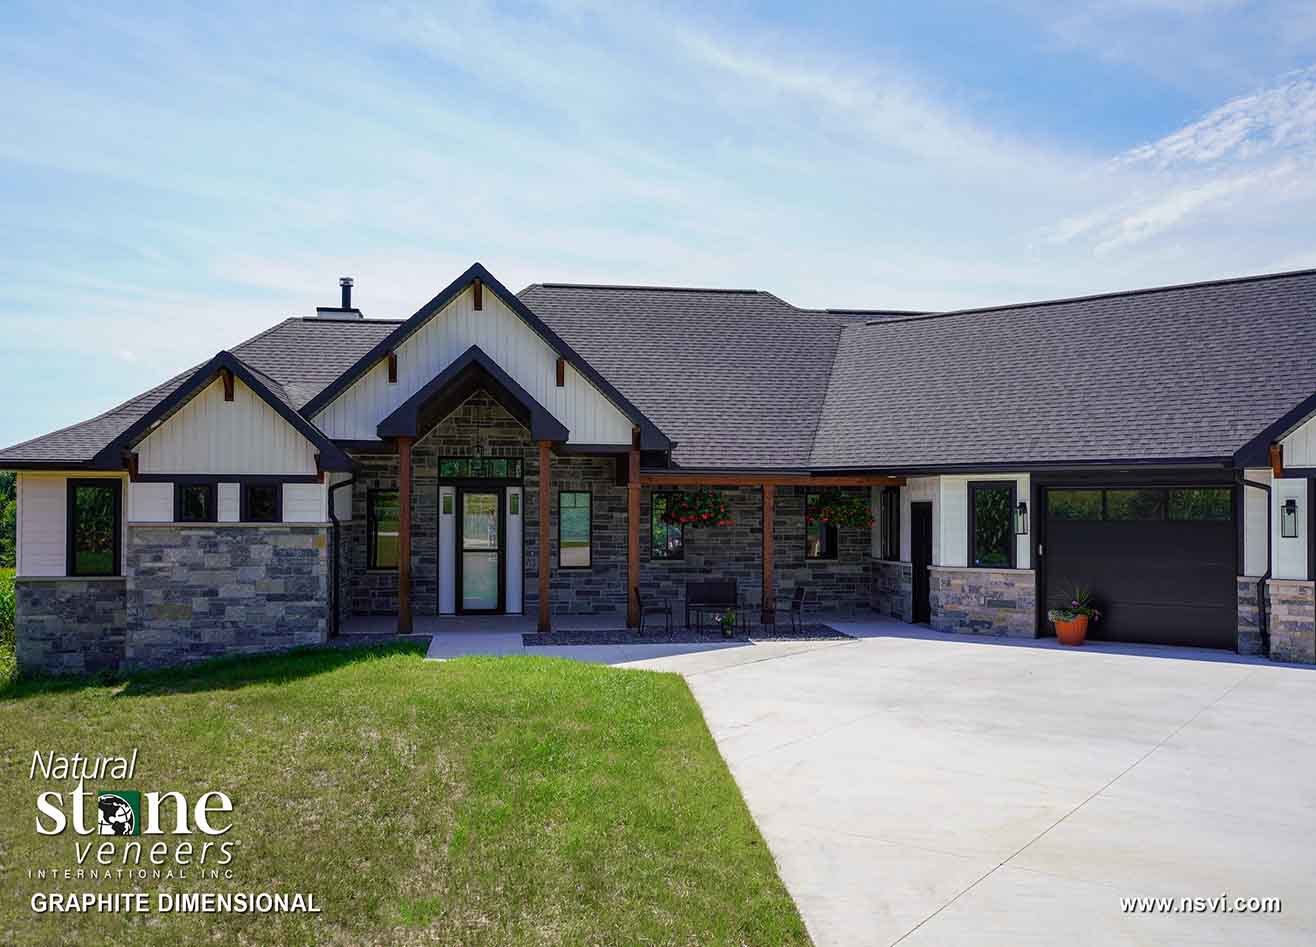 Fond du Lac Country™ - Residential Exterior - Fond du Lac Natural